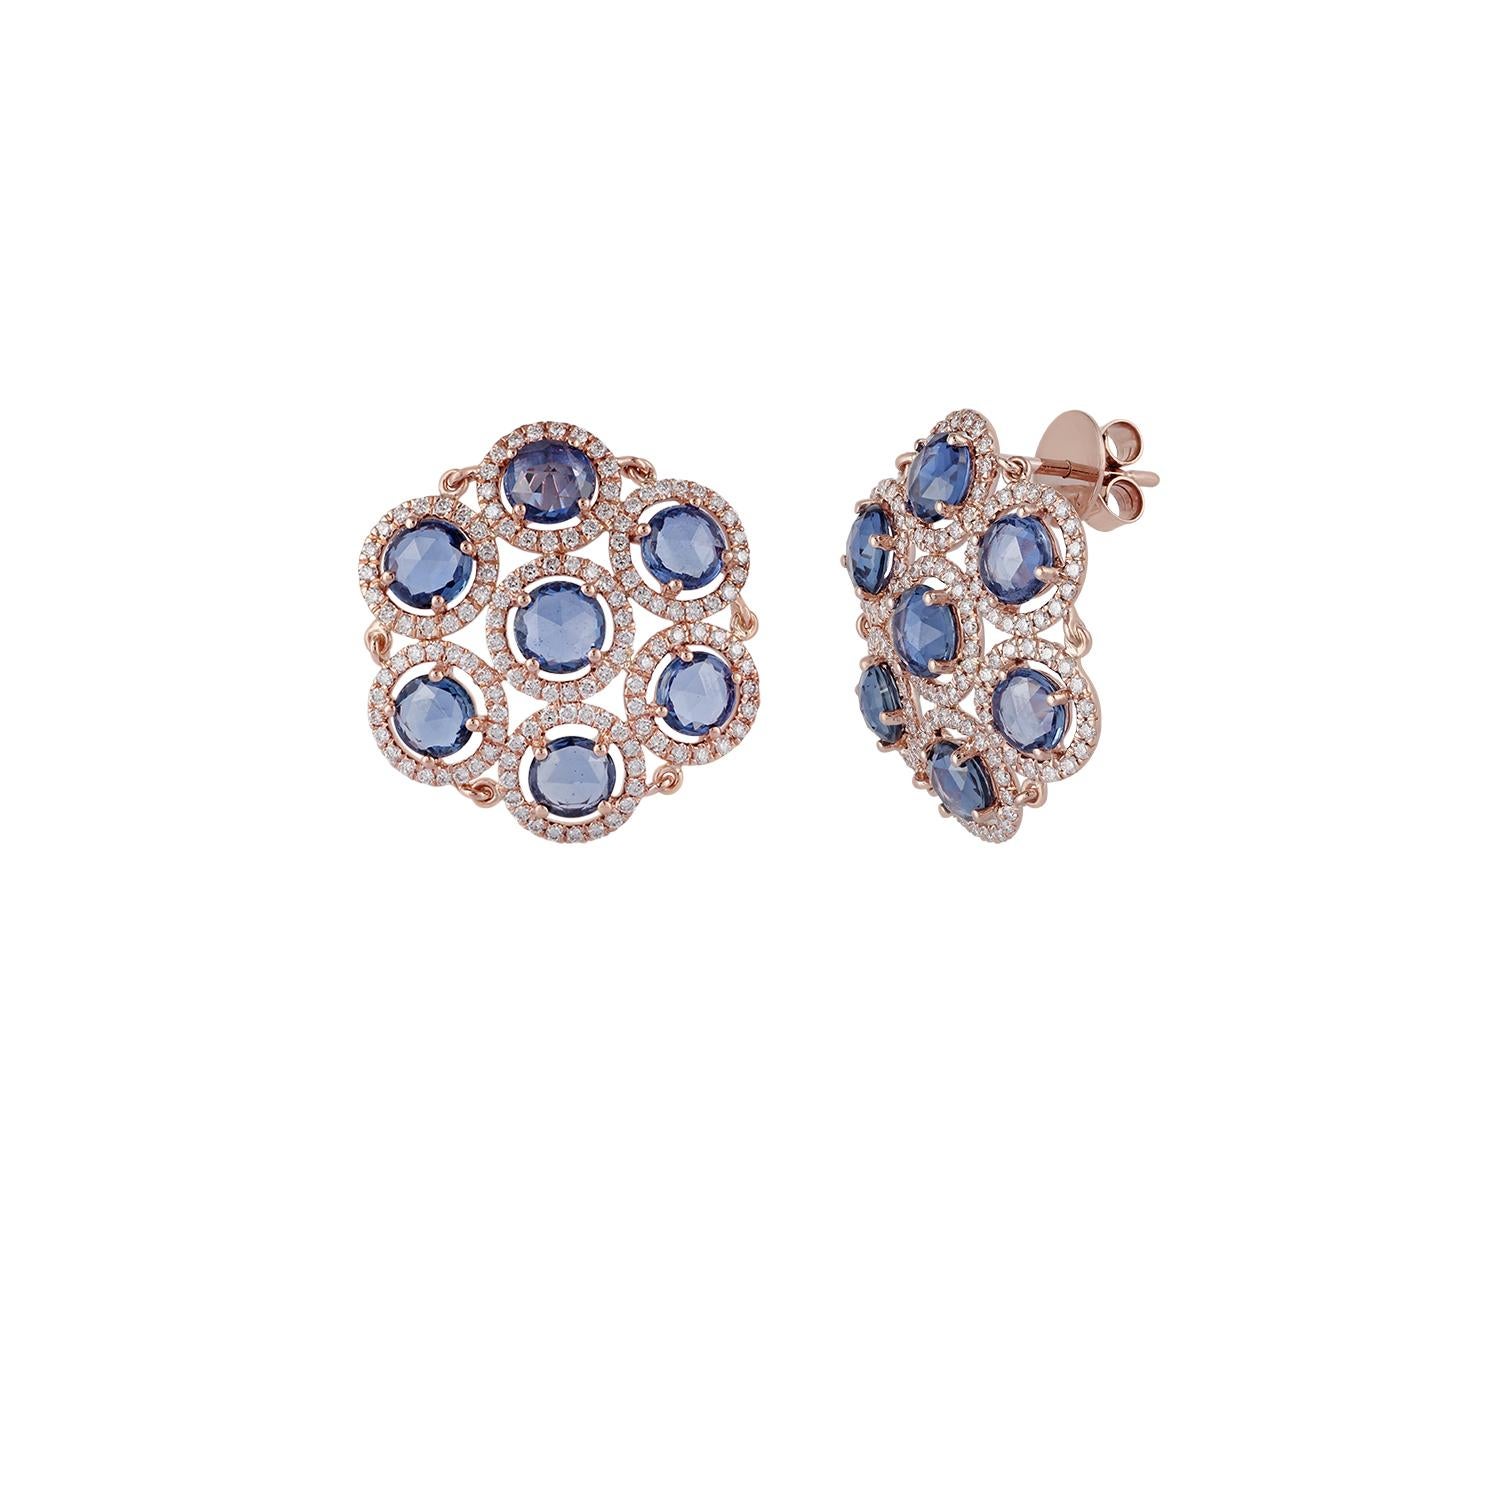 These are elegant & contemporary style earrings studded in 18K rose gold features 14 pieces of round shaped rose cut sapphires weight 8.30 carats with 266 pieces of round shaped brilliant cut diamonds weight 1.34 carats, this entire earring pair is